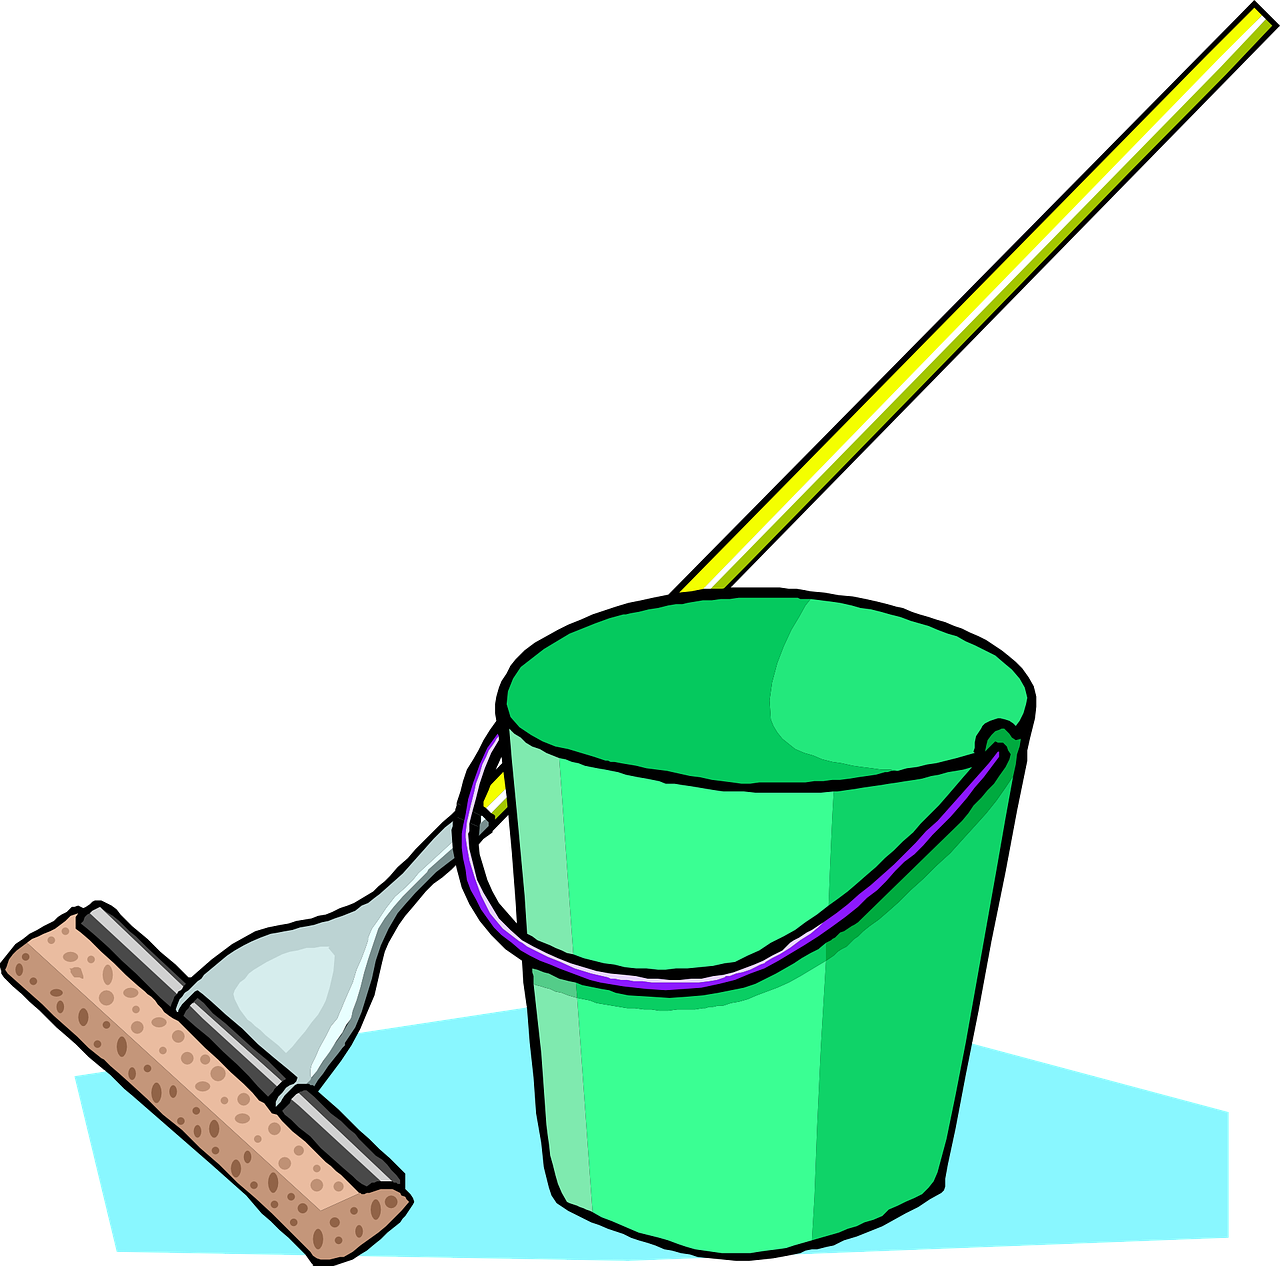 mop,bucket,mopping,wipe,swipe,cleaning,housework,hygiene,housekeeping,free vector graphics,free pictures, free photos, free images, royalty free, free illustrations, public domain